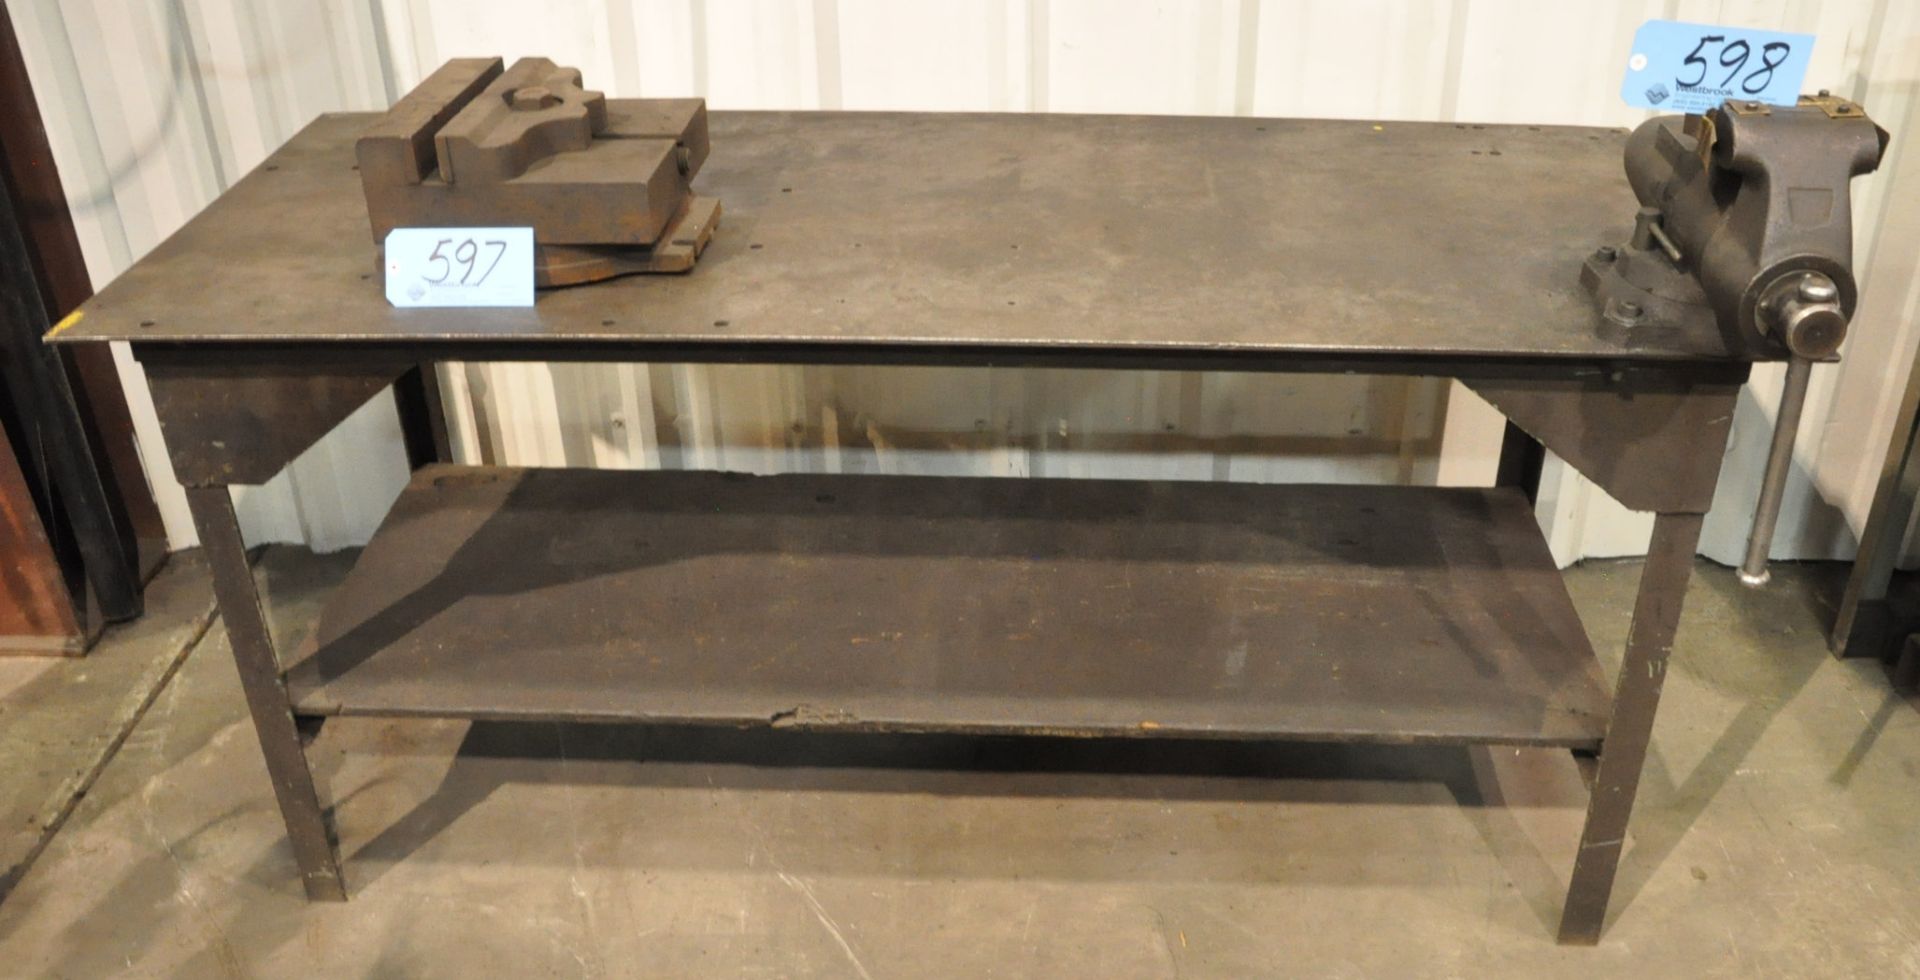 30" x 72" x 5/16" Steel Table with Wilton 5" Machinist Vise, with 30" x 60" Steel Bench